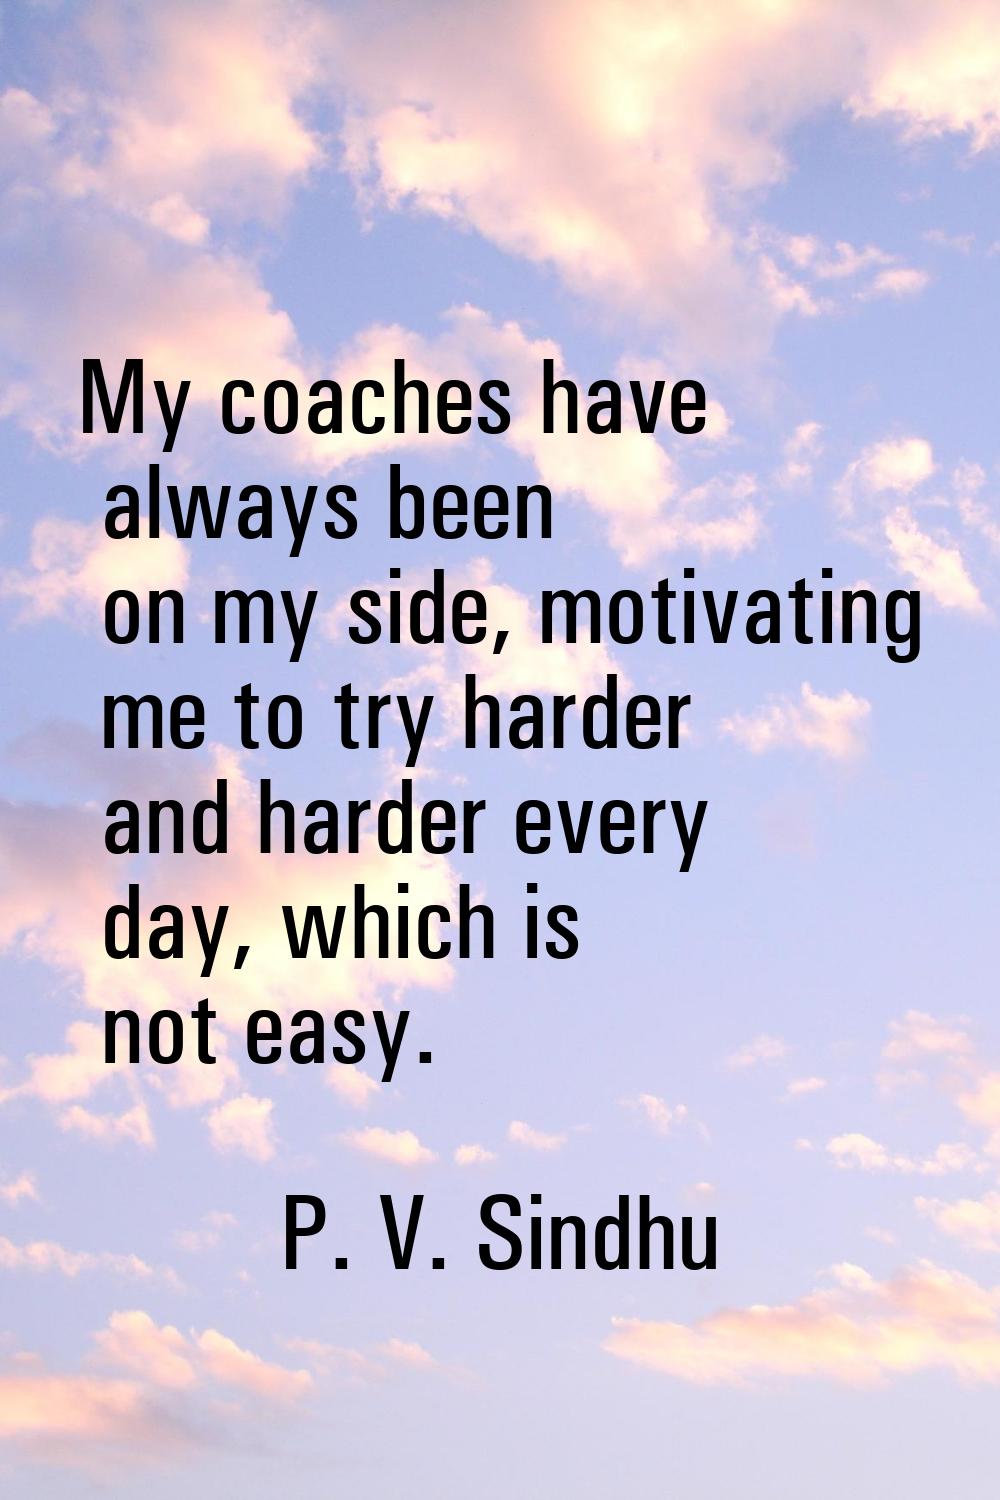 My coaches have always been on my side, motivating me to try harder and harder every day, which is 